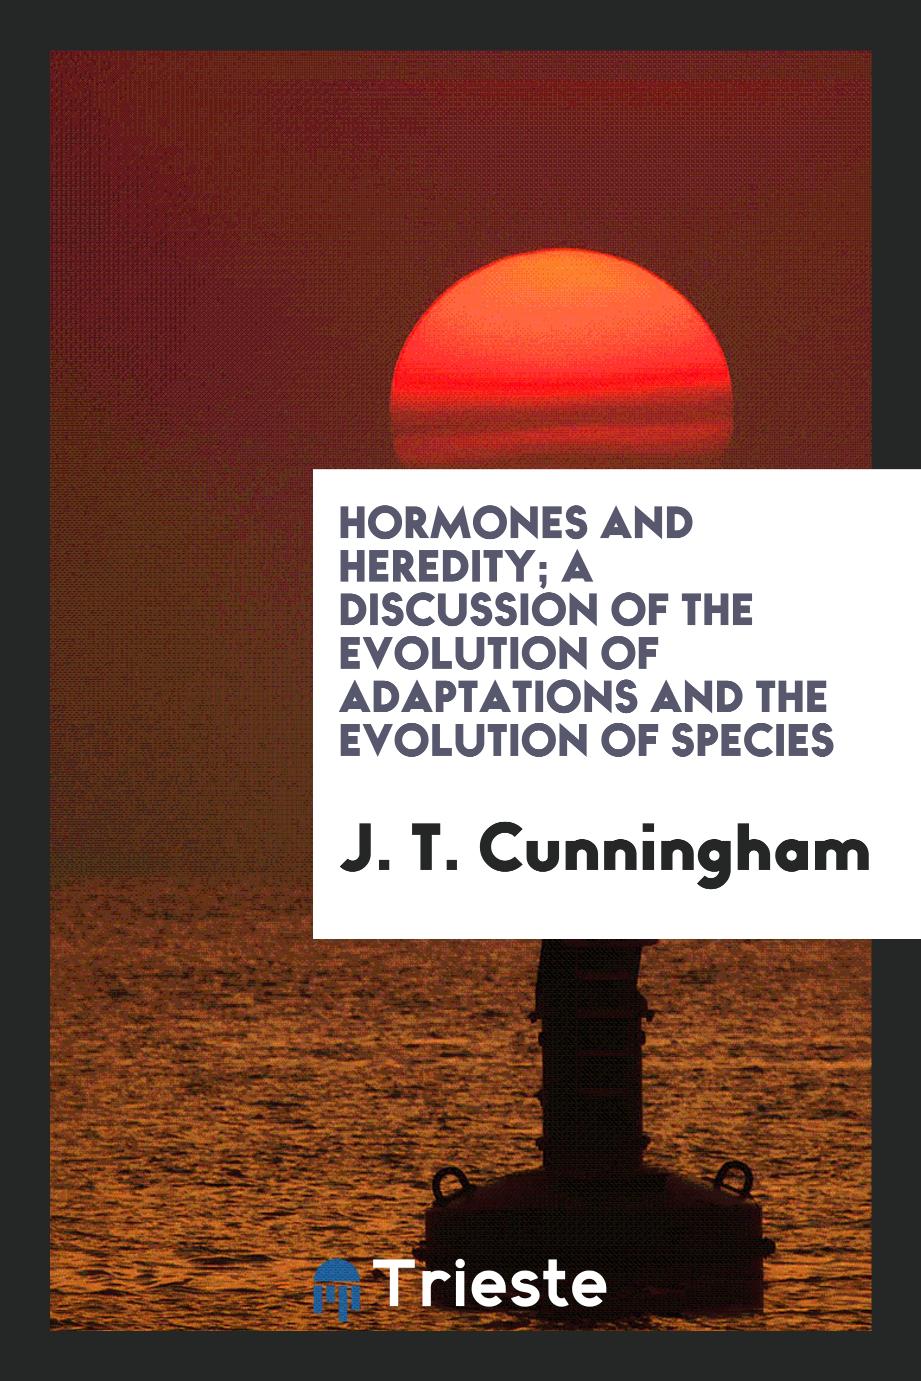 Hormones and heredity; a discussion of the evolution of adaptations and the evolution of species